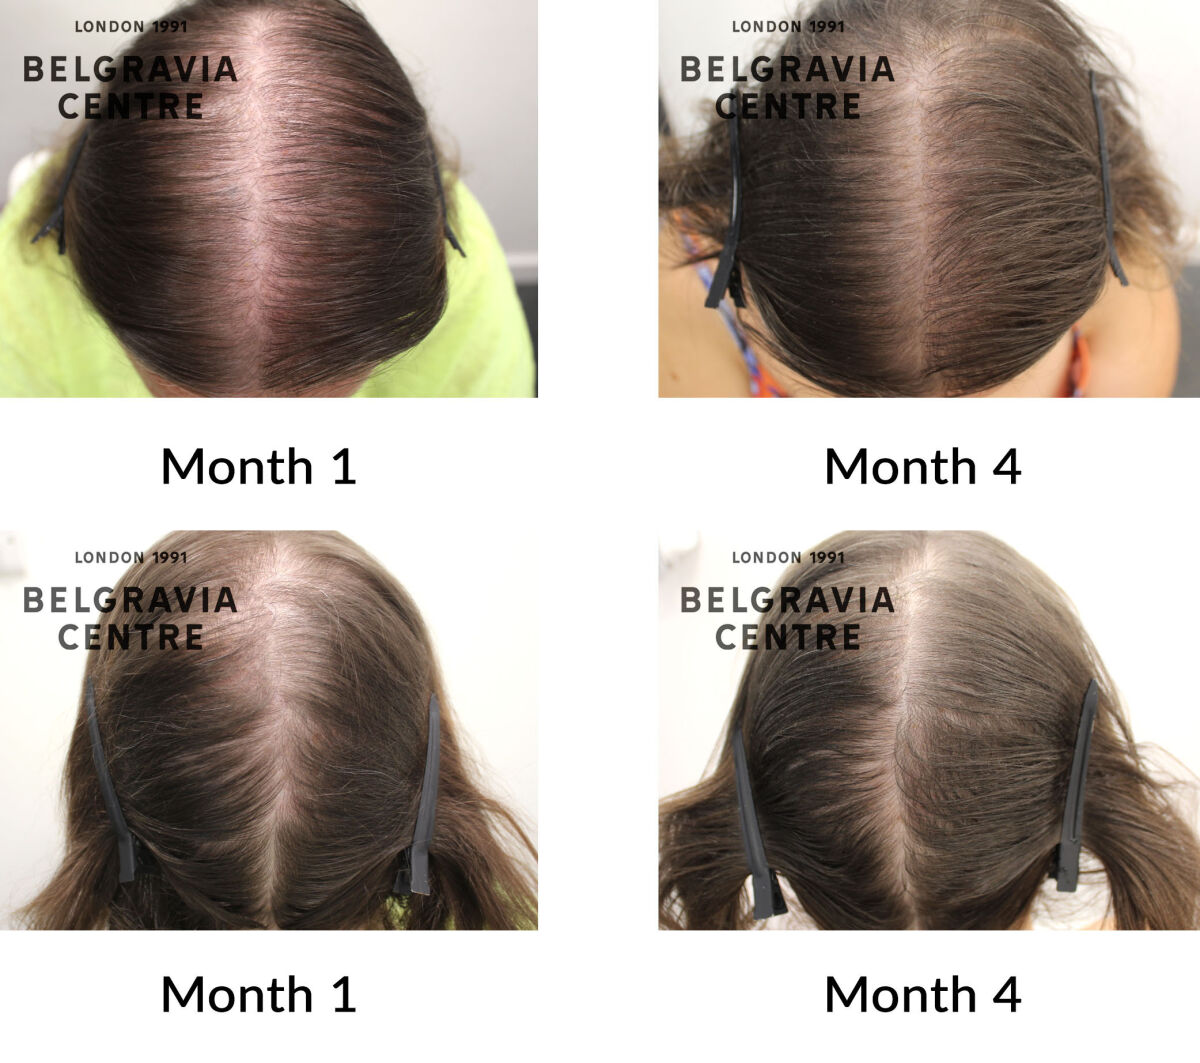 female pattern hair loss and diffuse hair loss the belgravia centre 349275